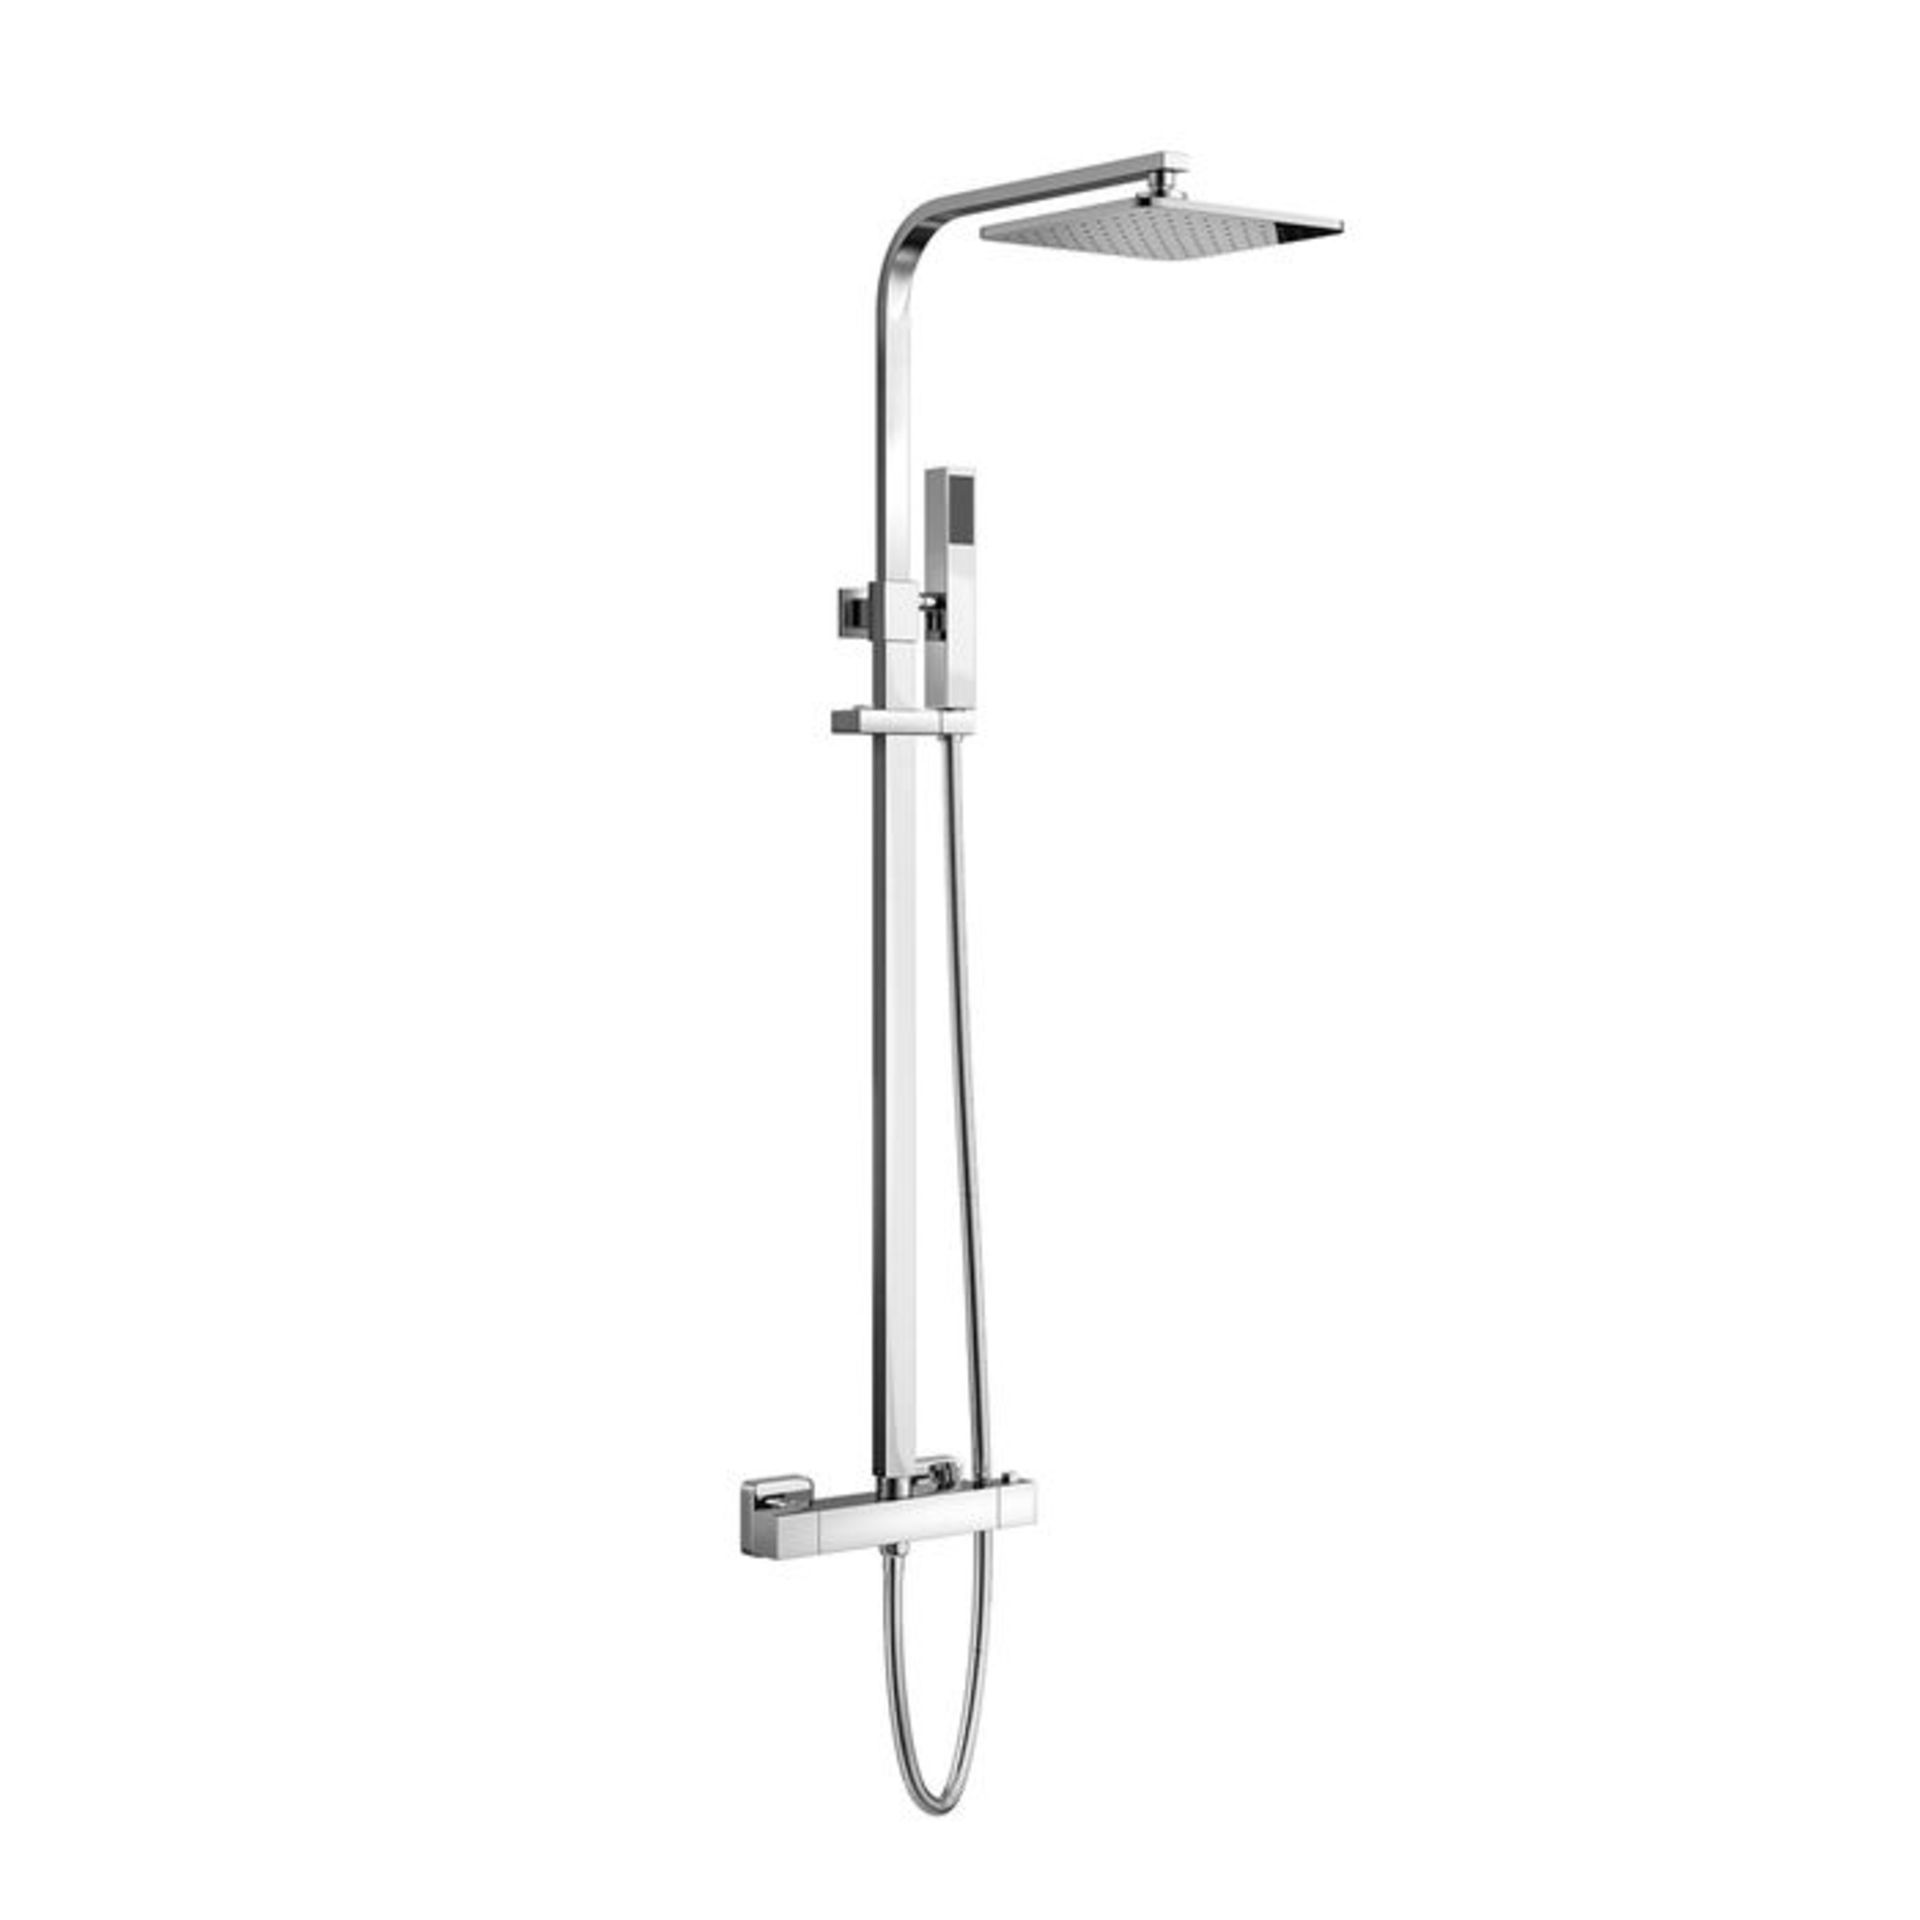 (W150) Square Exposed Thermostatic Shower Kit Medium Head- Harper. Angled, slim and on-trend - Image 2 of 3